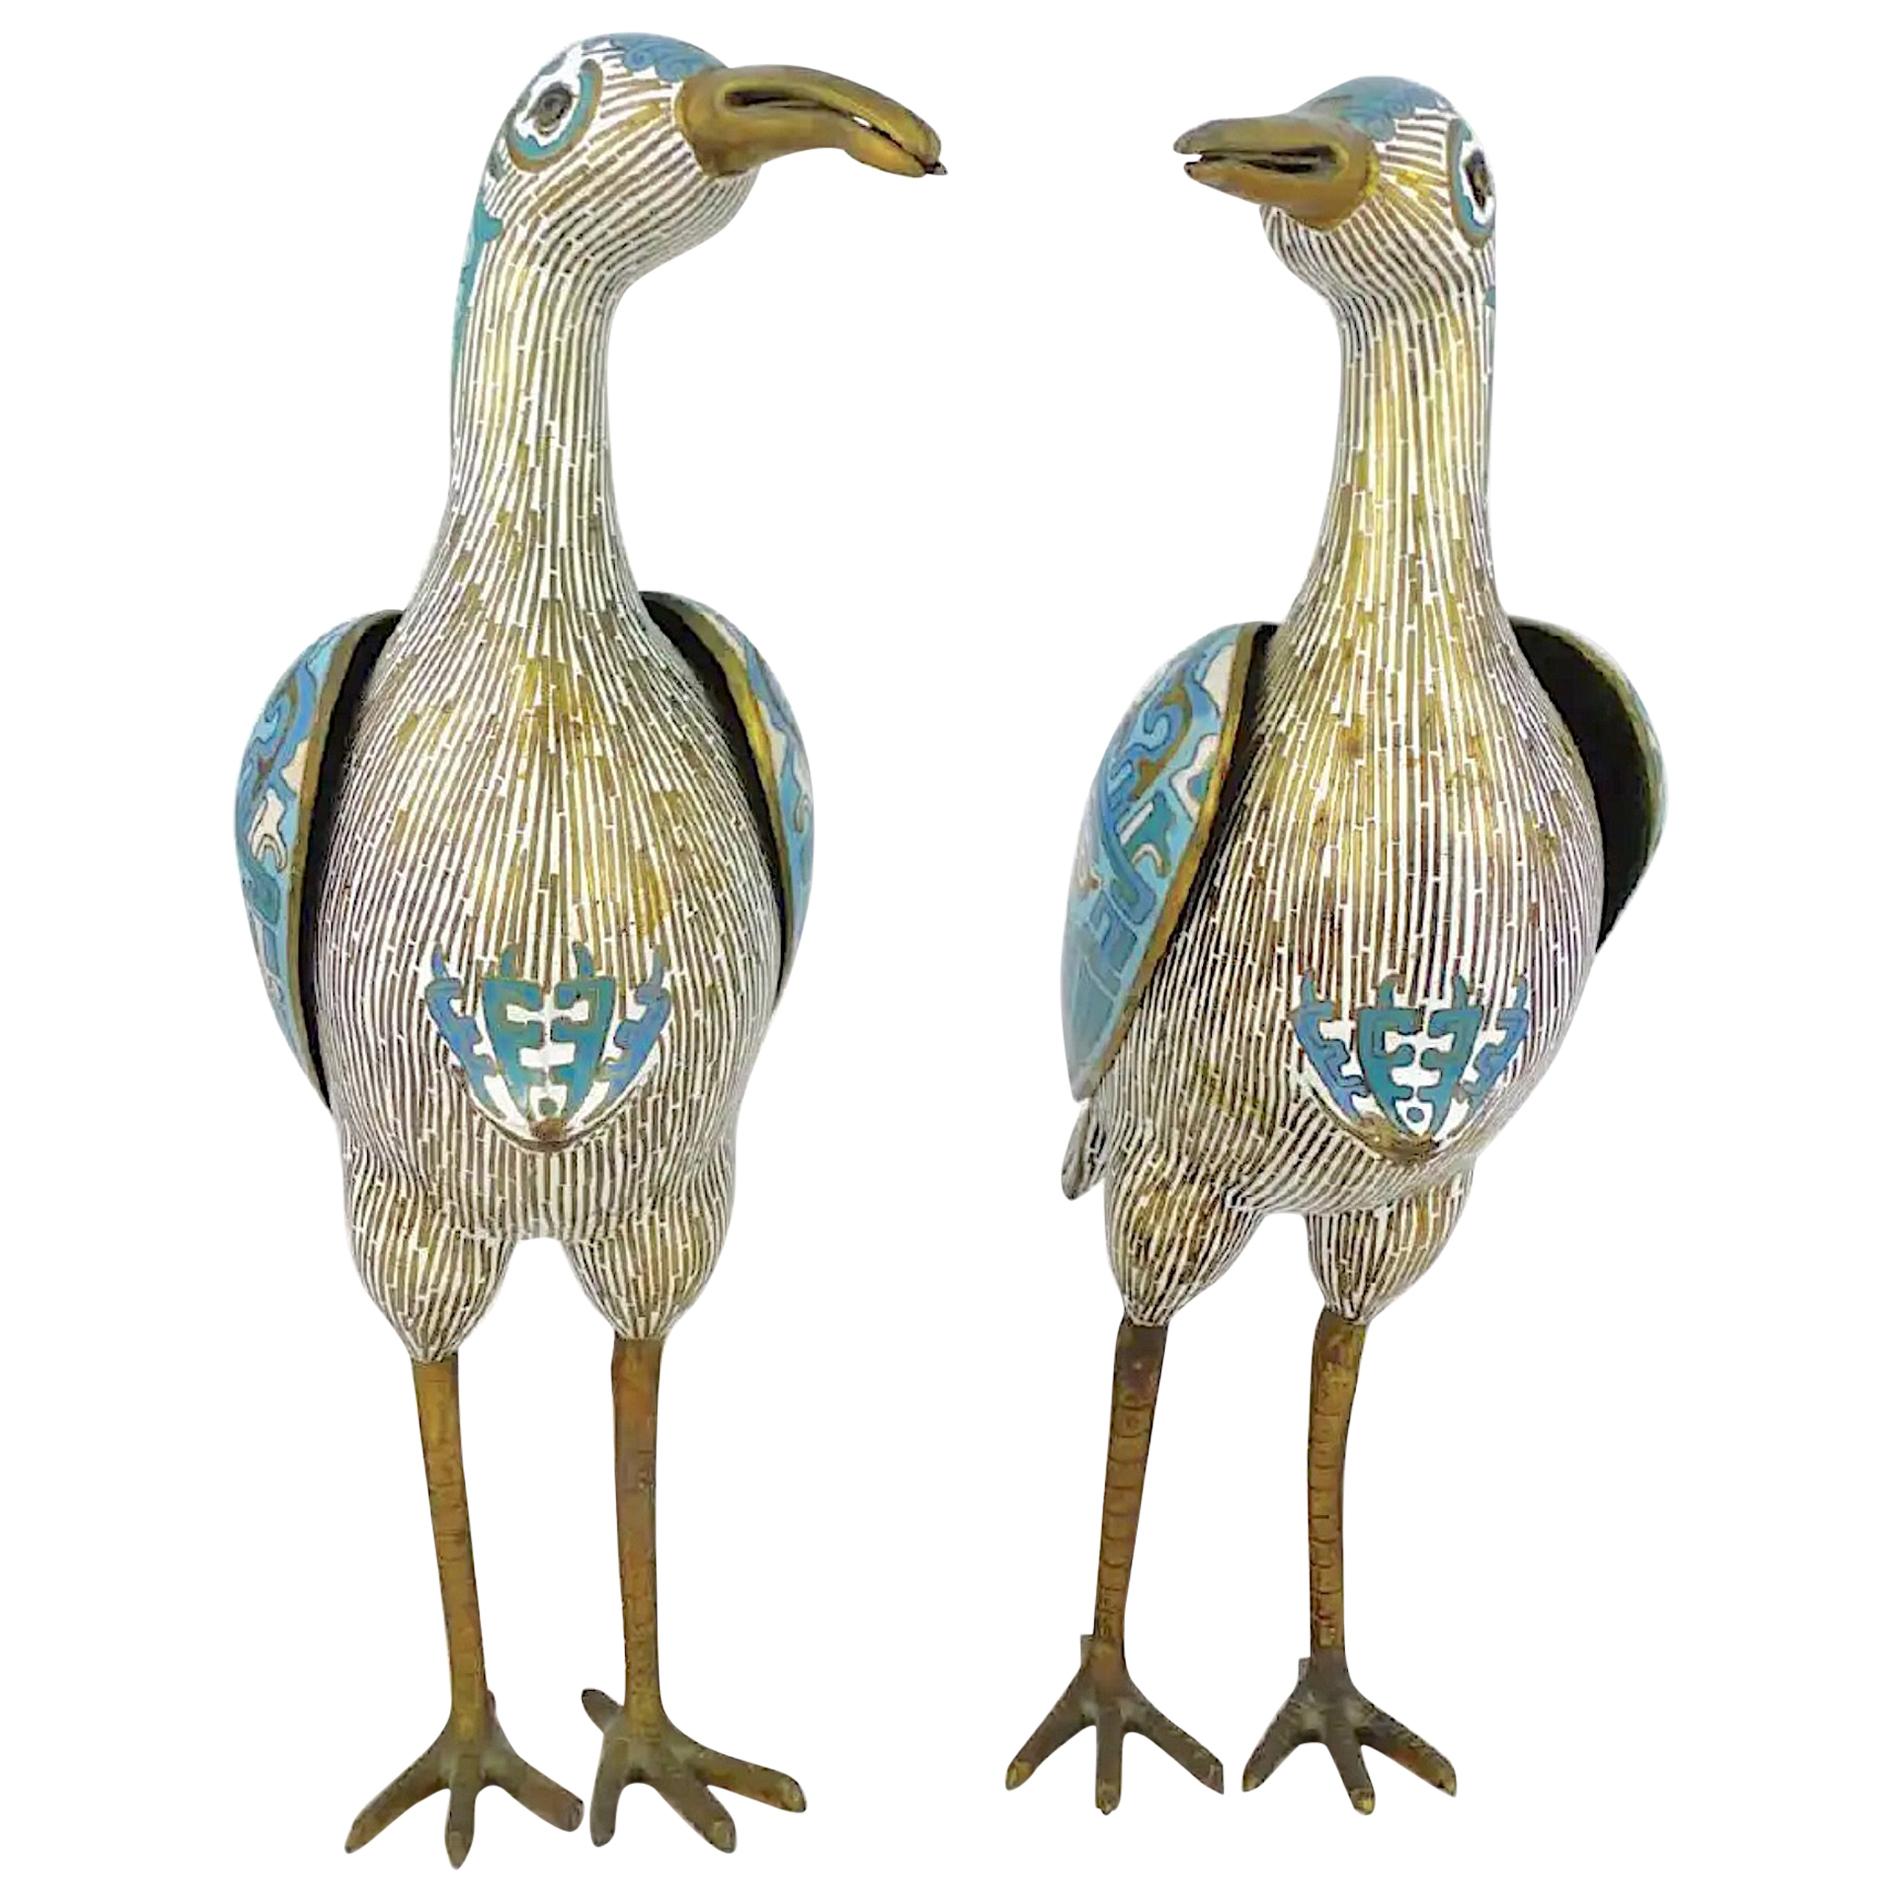 Pair of Chinese Cloisonné Large Bird Form Vessels For Sale